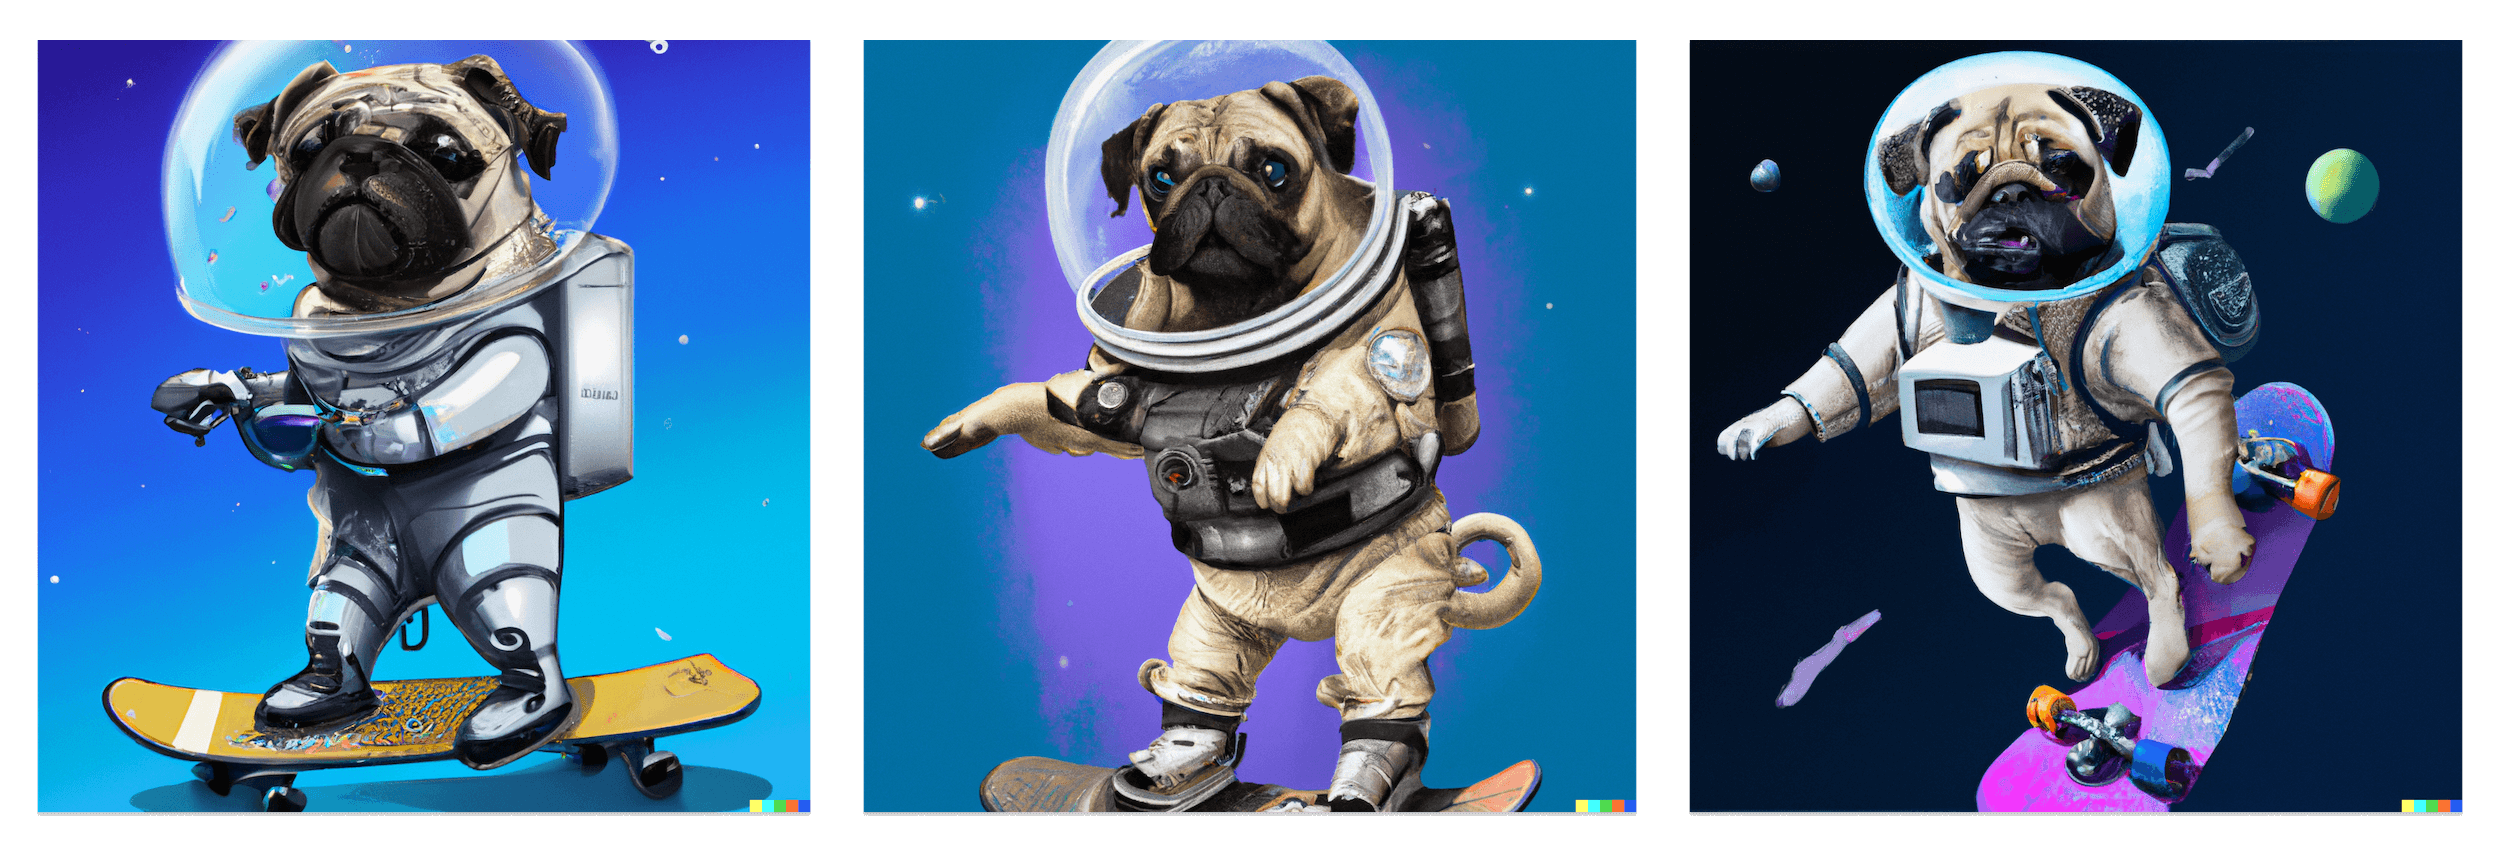 Three photos of a pug in an astronaut suit and helmet, riding on a skateboard, in various scenes with starts and planets in the background